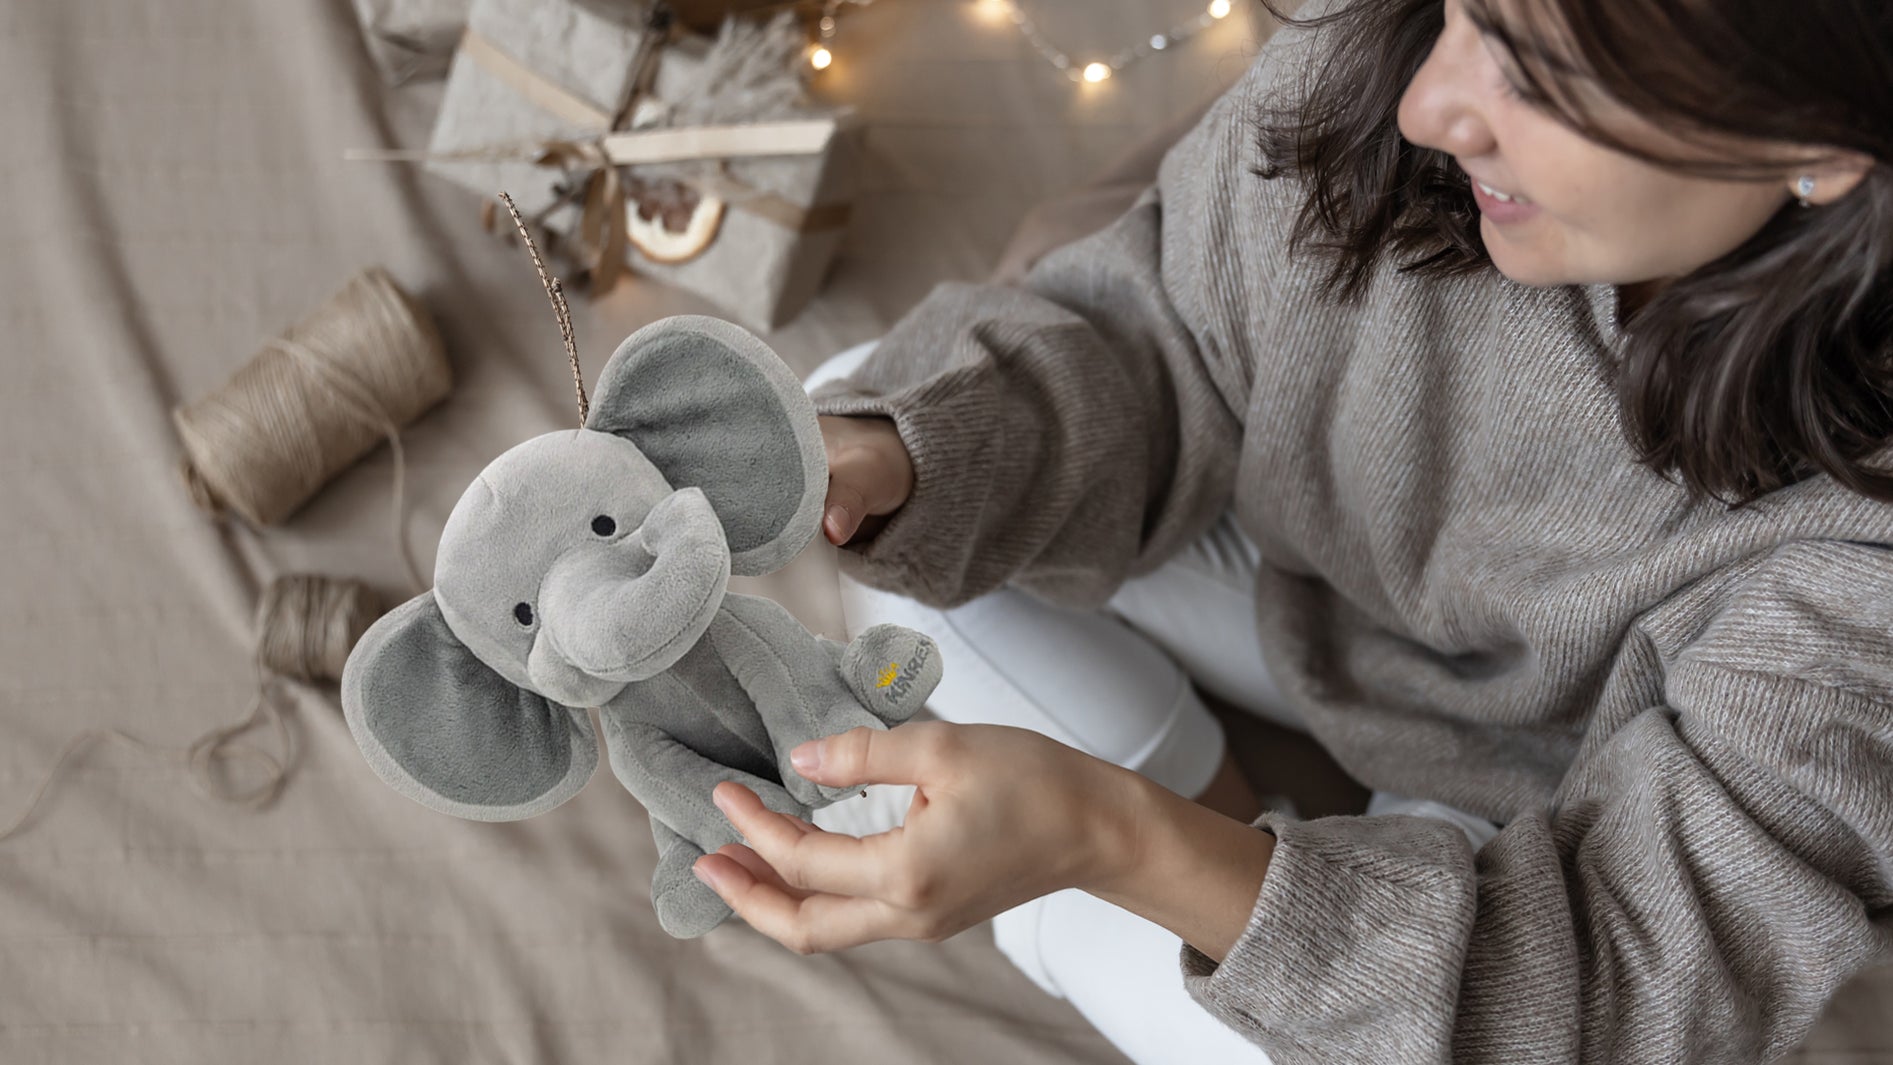 What Makes Personalized Stuffed Elephant Plush Custom the Best Gift Choice?